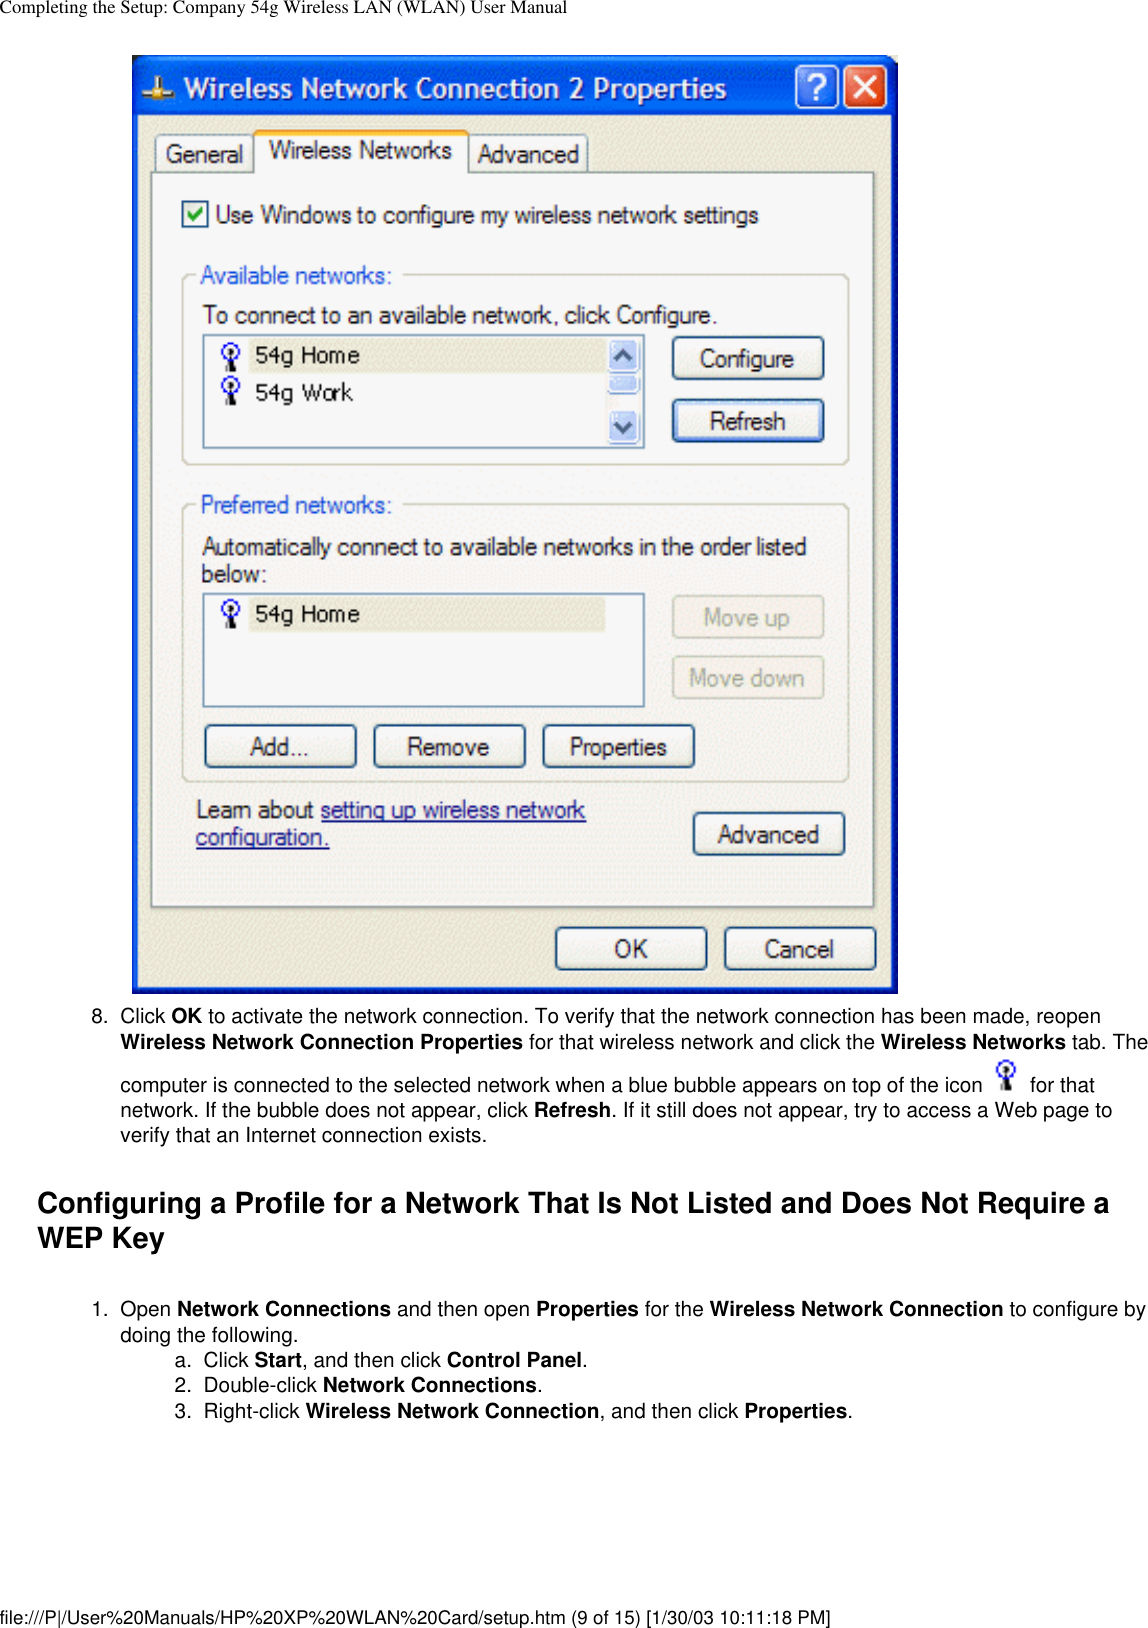 Completing the Setup: Company 54g Wireless LAN (WLAN) User Manual8.  Click OK to activate the network connection. To verify that the network connection has been made, reopen Wireless Network Connection Properties for that wireless network and click the Wireless Networks tab. The computer is connected to the selected network when a blue bubble appears on top of the icon   for that network. If the bubble does not appear, click Refresh. If it still does not appear, try to access a Web page to verify that an Internet connection exists. Configuring a Profile for a Network That Is Not Listed and Does Not Require a WEP Key1.  Open Network Connections and then open Properties for the Wireless Network Connection to configure by doing the following. a.  Click Start, and then click Control Panel.2.  Double-click Network Connections.3.  Right-click Wireless Network Connection, and then click Properties. file:///P|/User%20Manuals/HP%20XP%20WLAN%20Card/setup.htm (9 of 15) [1/30/03 10:11:18 PM]